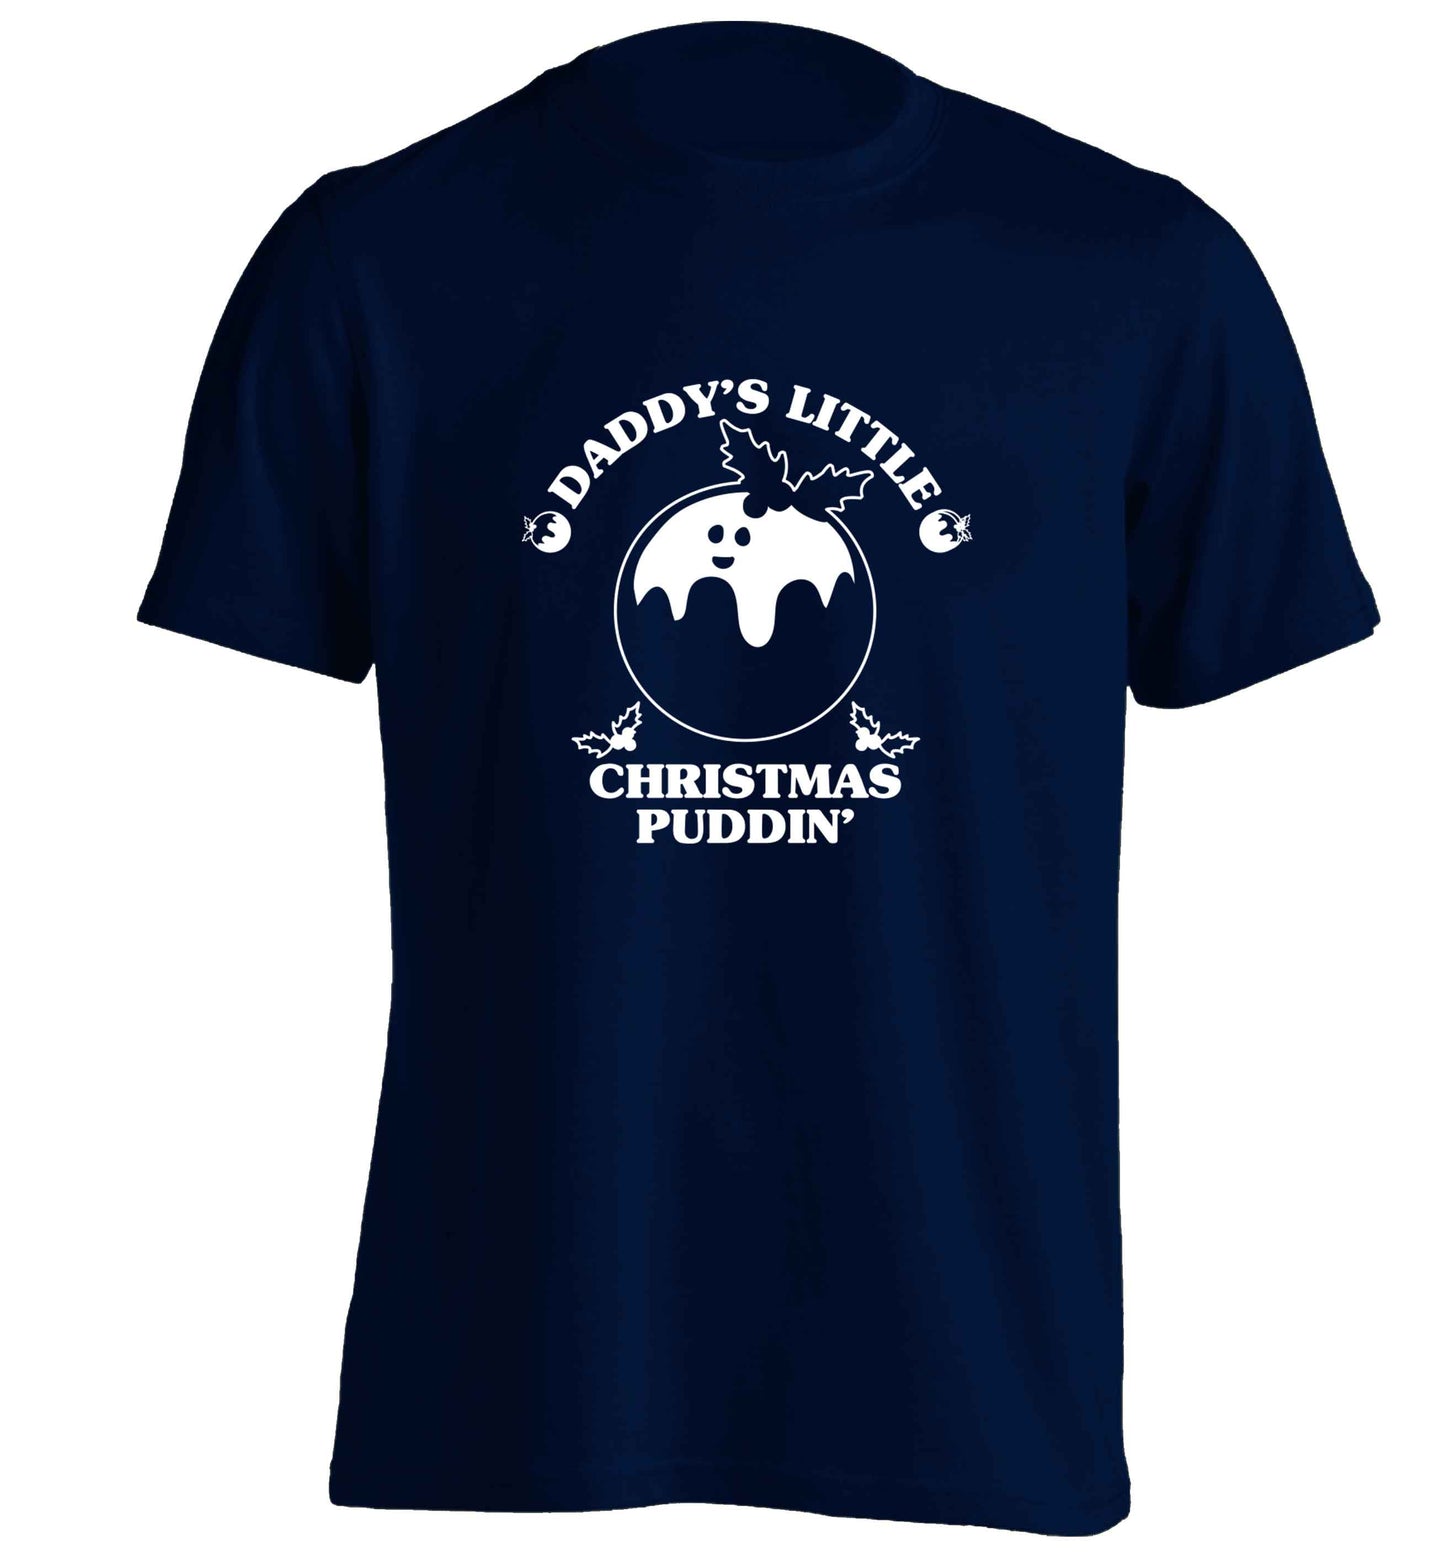 Daddy's little Christmas puddin' adults unisex navy Tshirt 2XL